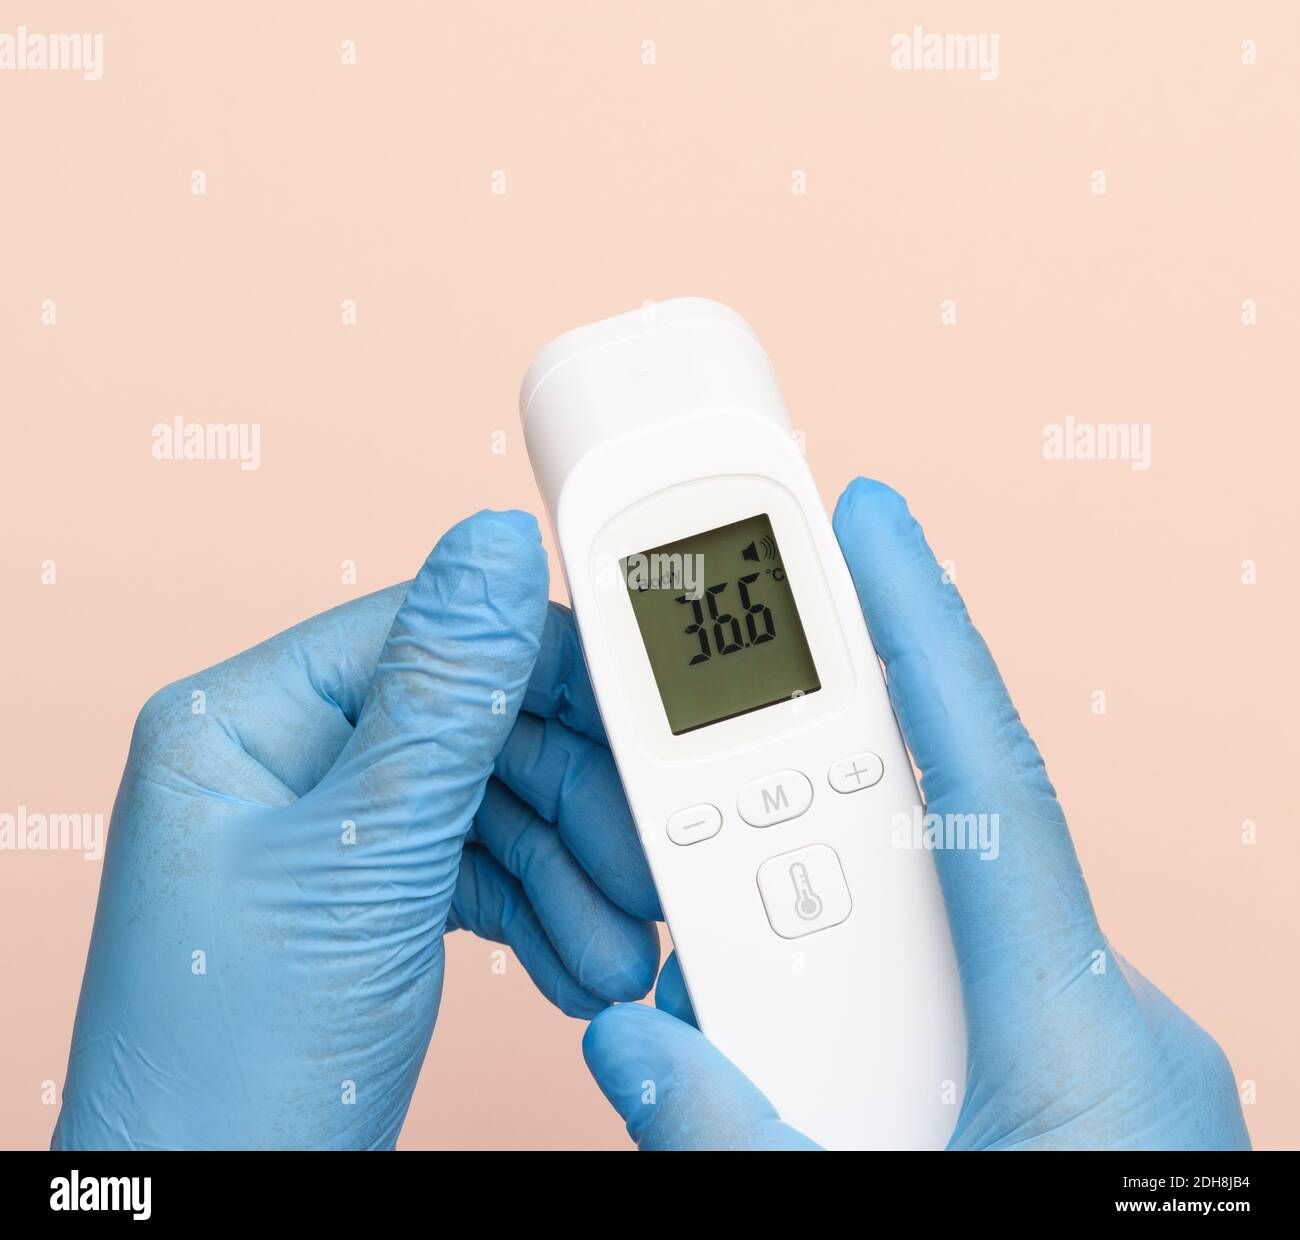 https://c8.alamy.com/comp/2DH8JB4/hand-in-blue-latex-gloves-hold-an-electronic-thermometer-to-measure-temperature-non-contact-device-display-shows-temperature-366-degrees-2DH8JB4.jpg